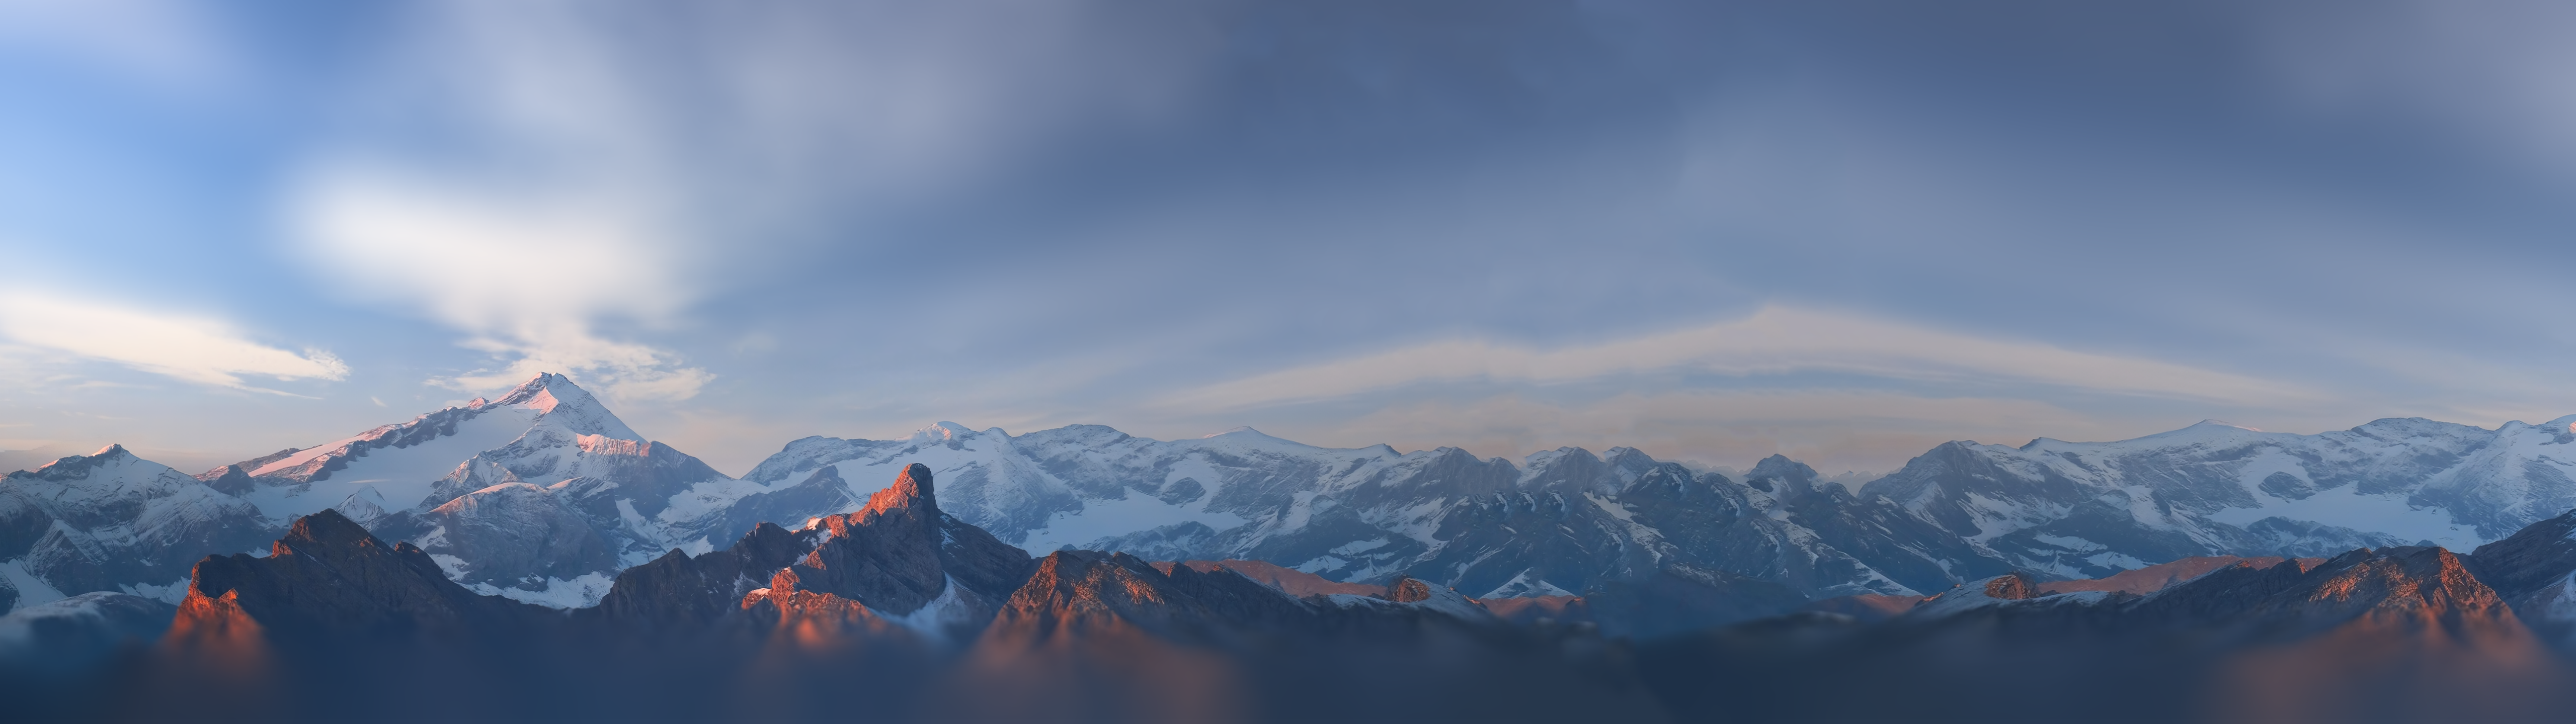 Landscape Ultrawide Snowy Mountain Sky Clouds Snow Nature Mountains 5120x1440